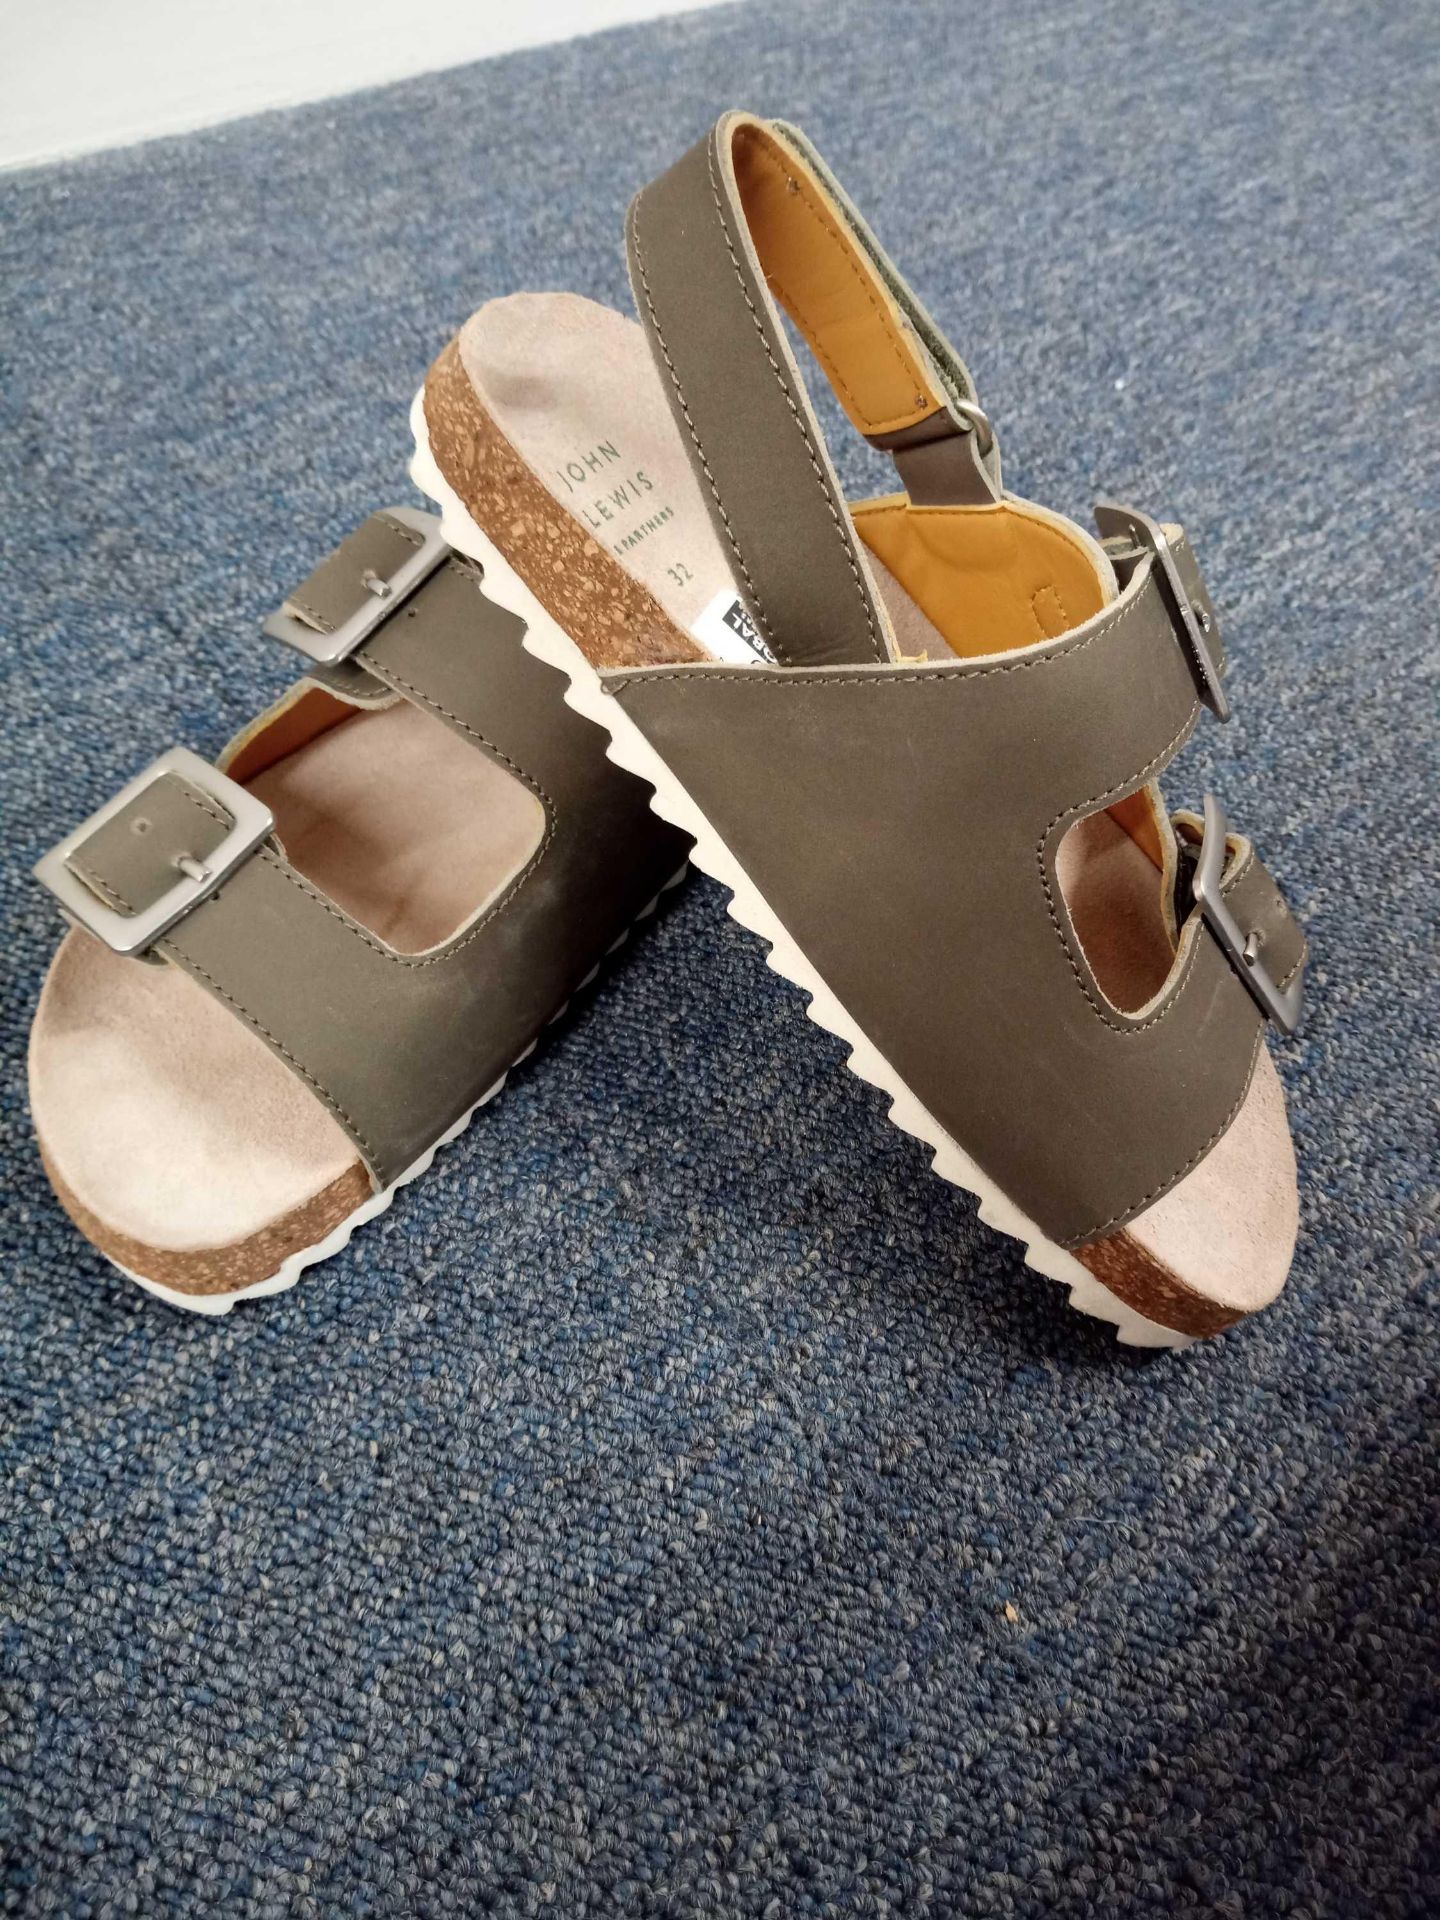 Rrp £25 Children'S Sandals Size 32 - Image 2 of 3